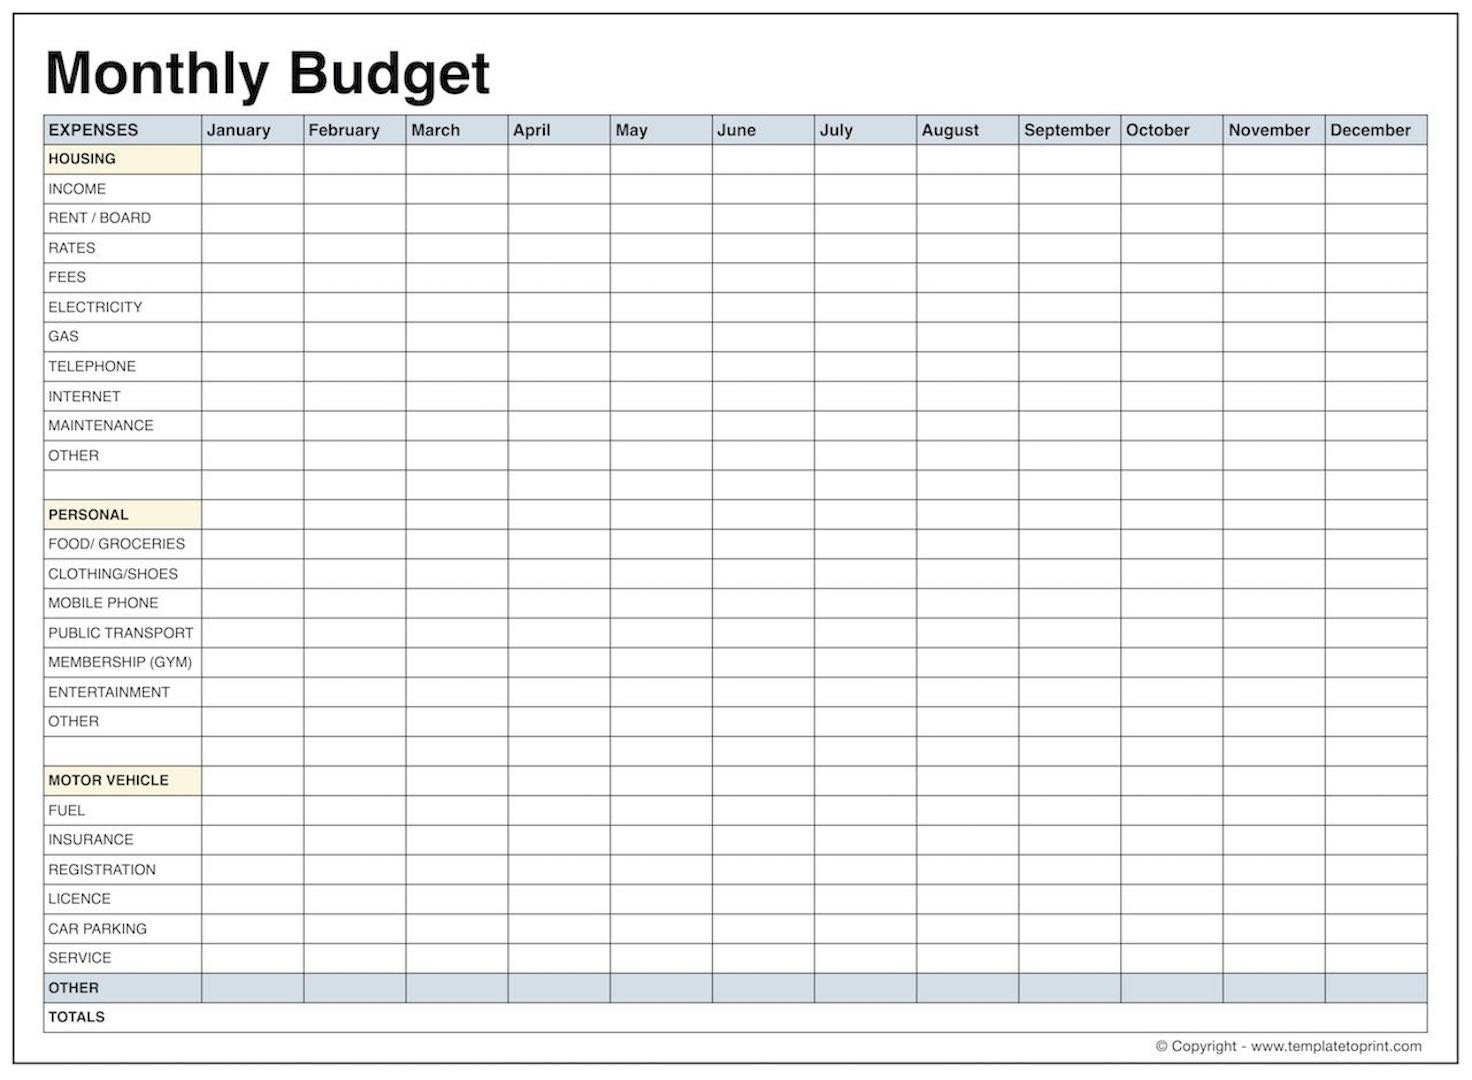 005 Plans Daily Budget Shocking Template Plan Templates Personal With Daily Budget Worksheet Pdf